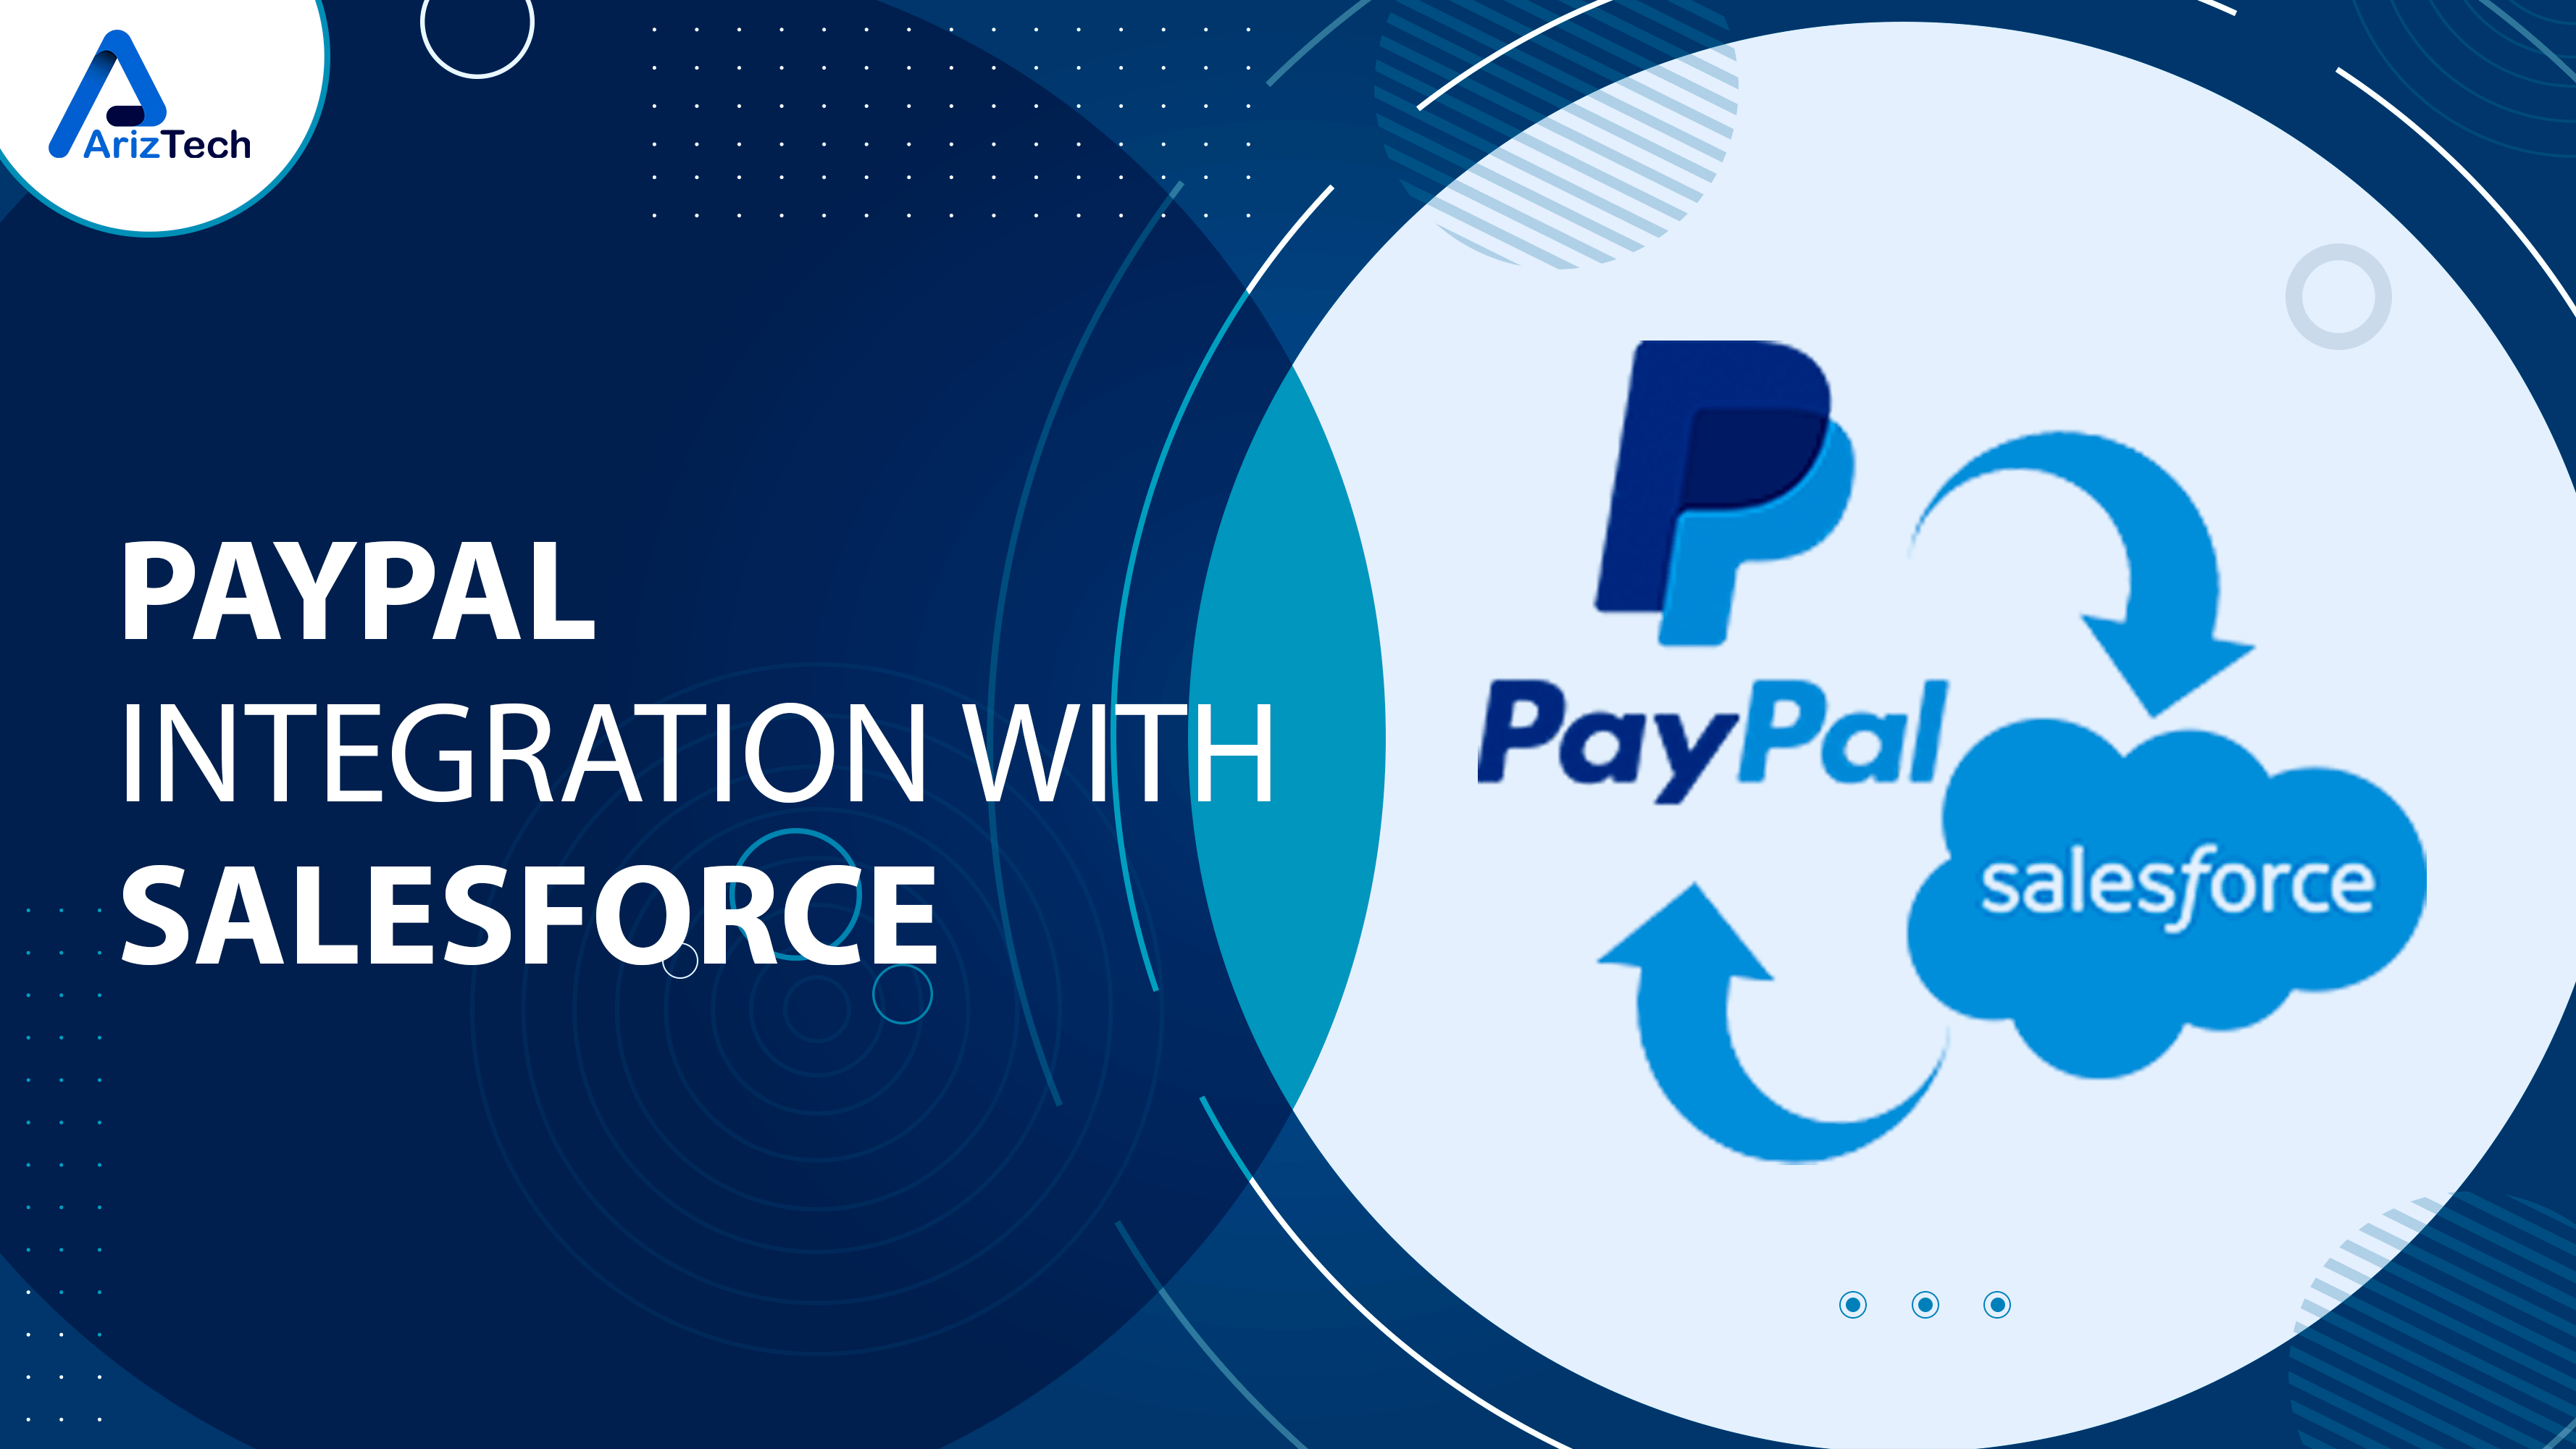 Paypal integration with salesforce